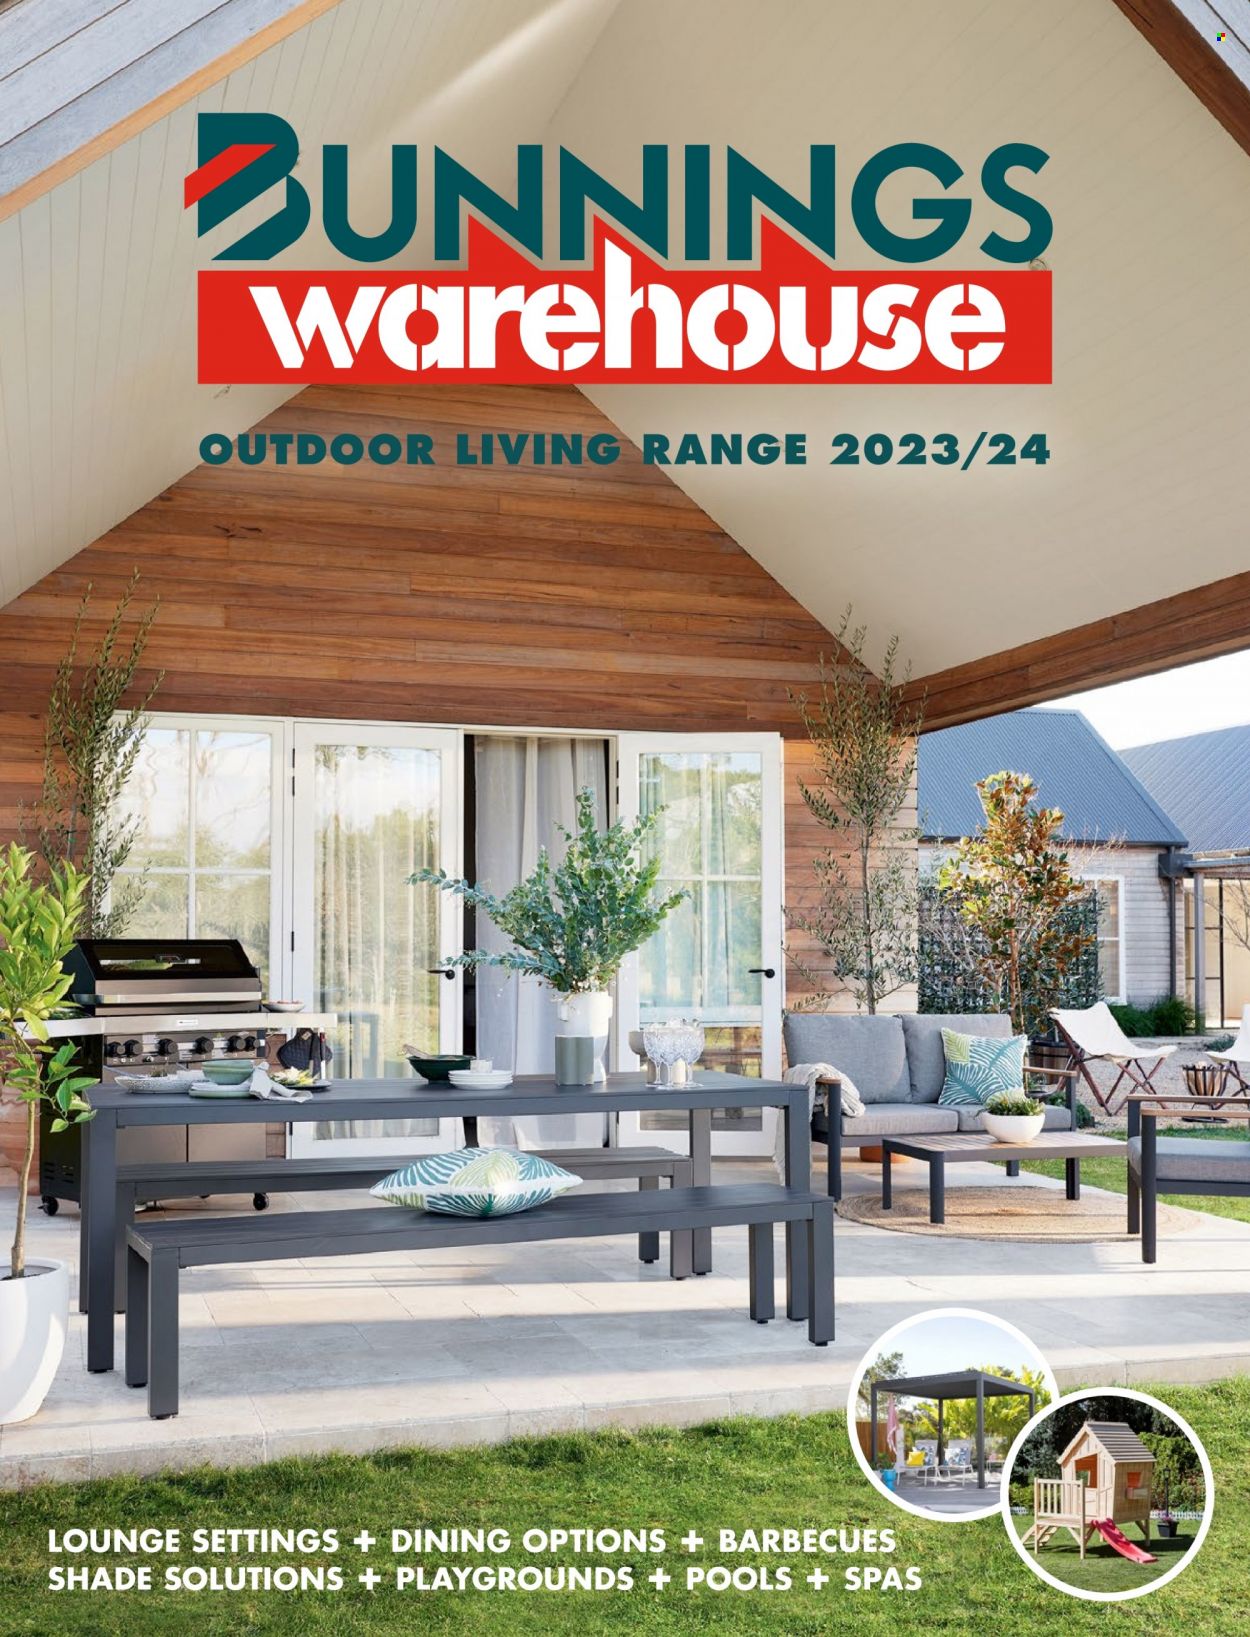 Bunnings Warehouse mailer . Page 1.